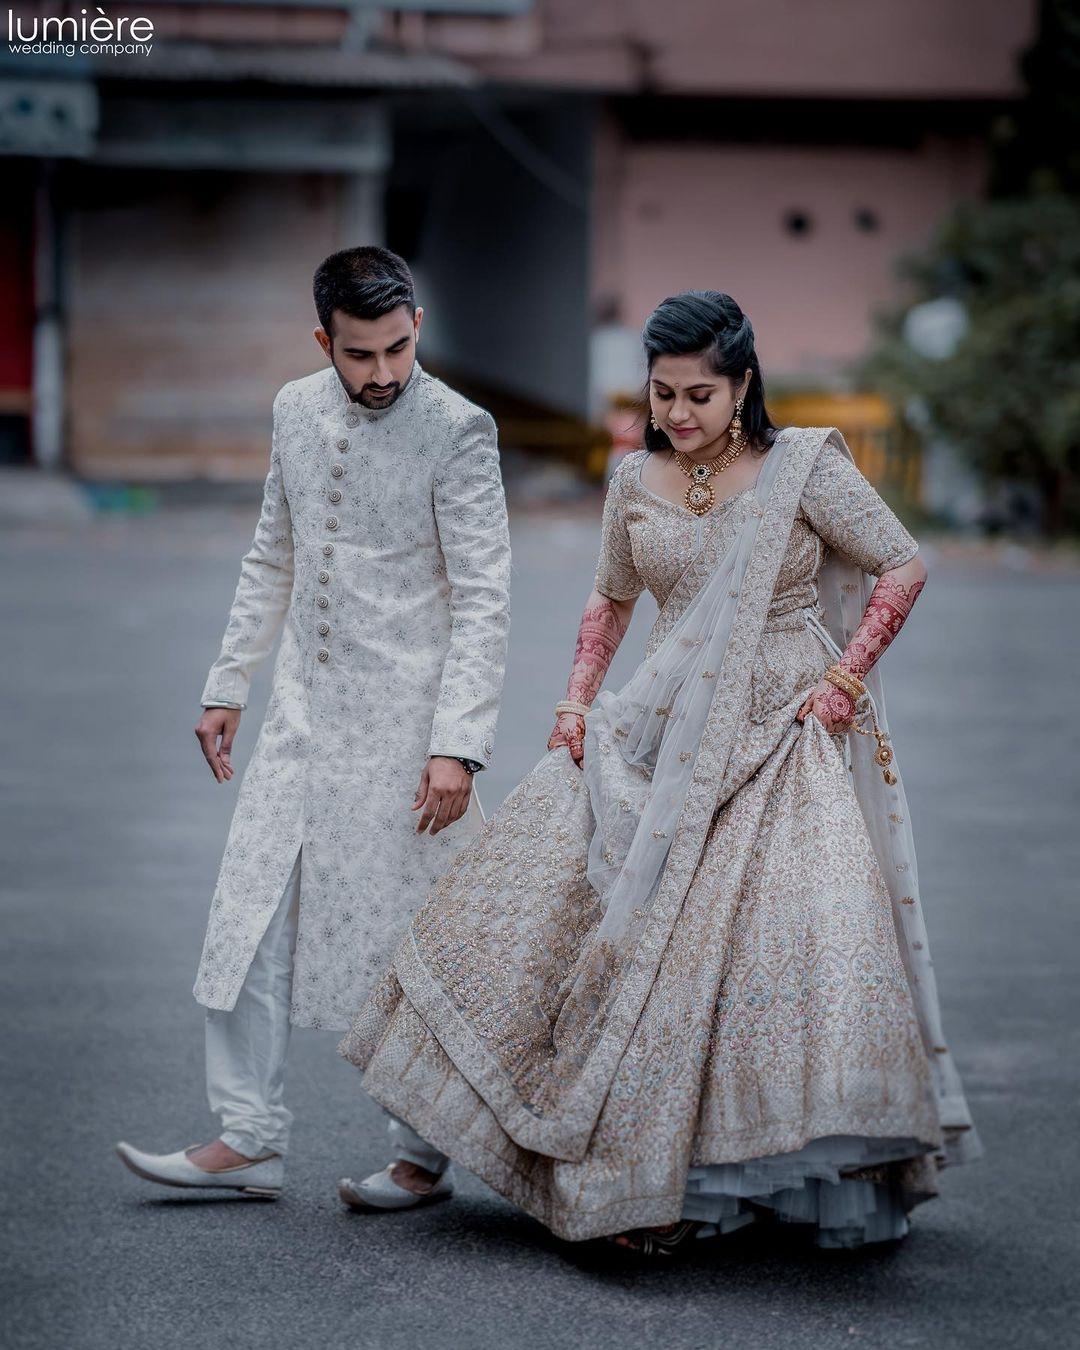 19 lovely Bride and Groom dress combinations - Stylebees.com